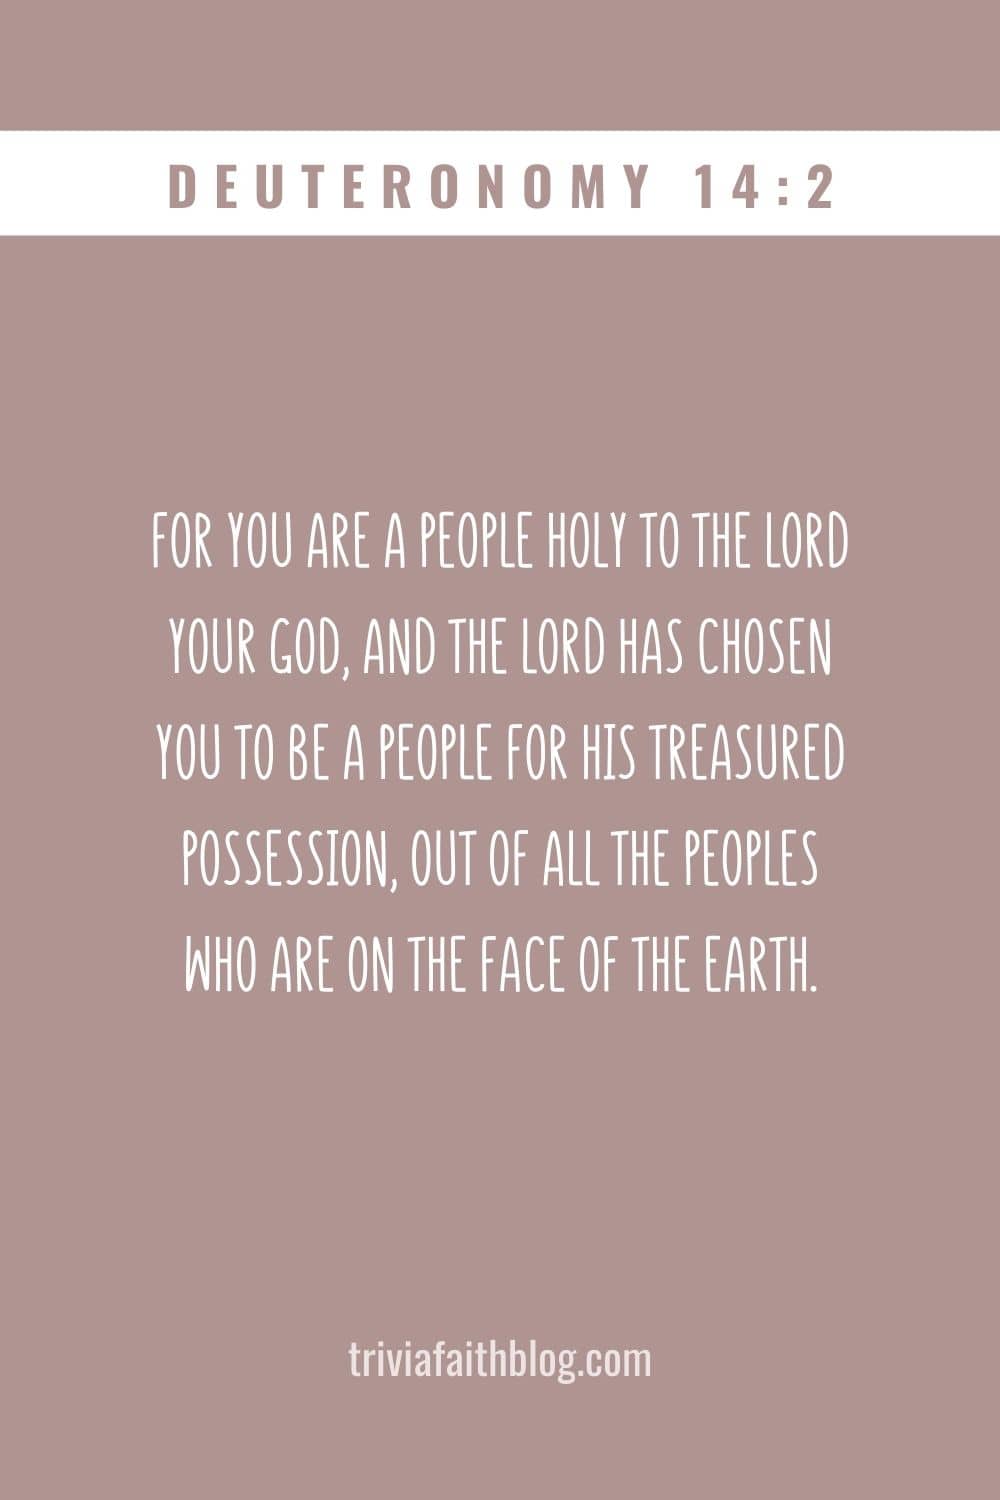 For you are a people holy to the Lord your God, and the Lord has chosen you to be a people for his treasured possession, out of all the peoples who are on the face of the earth